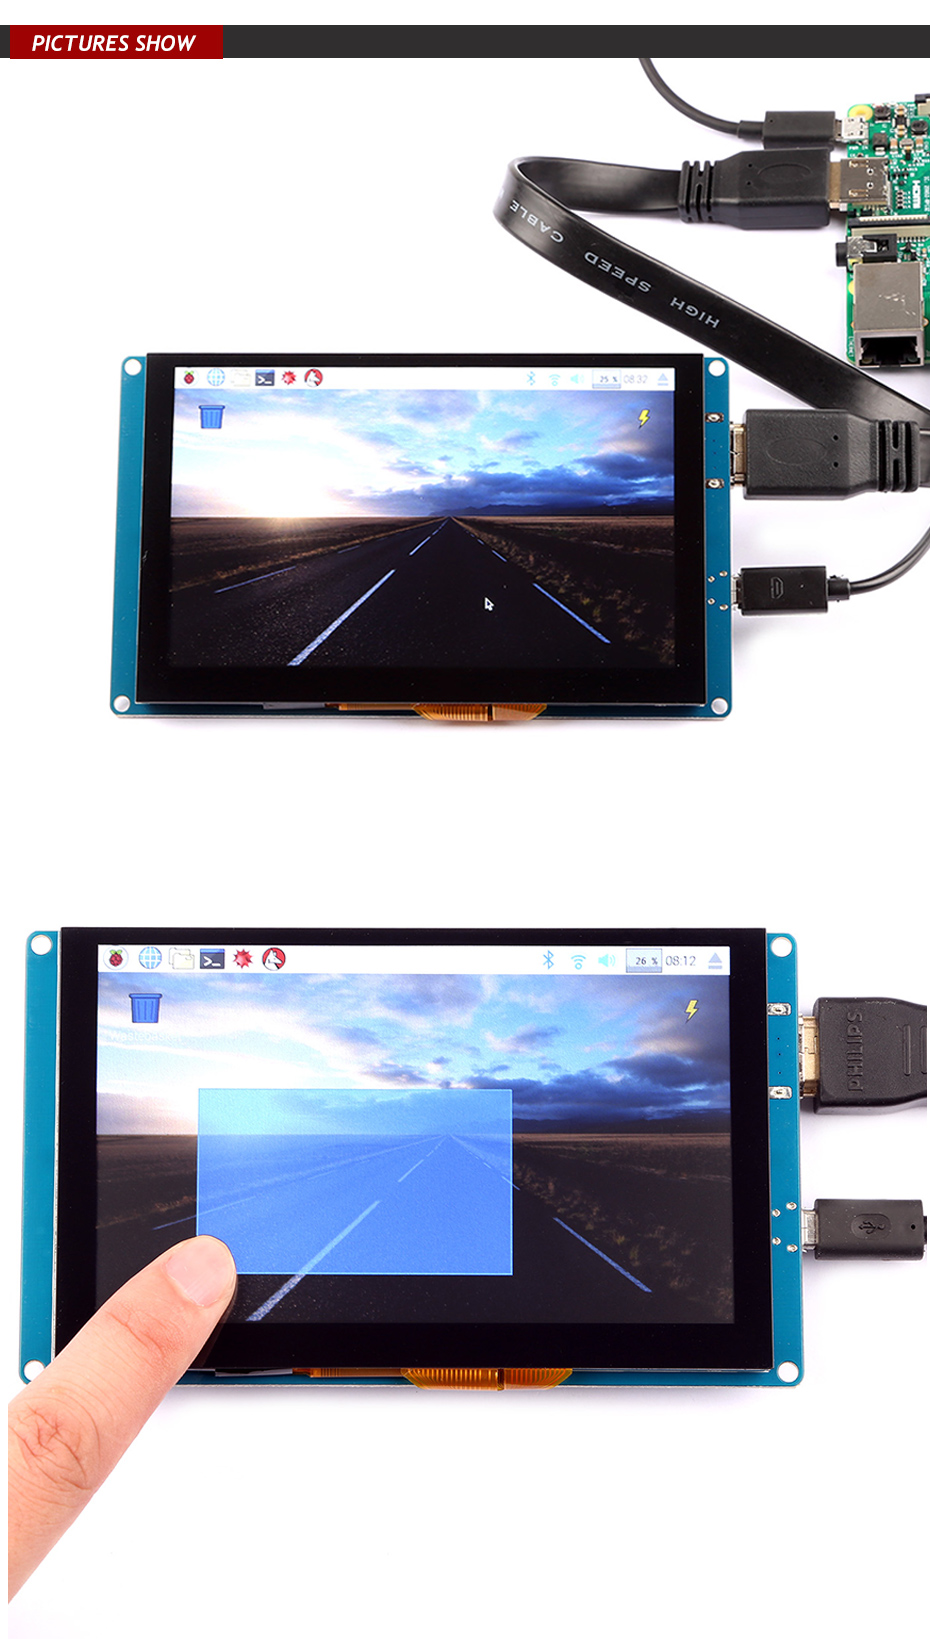 5-Inch-800480-Resolution-HD-Capacity-Touch-Screen-Support-USB-Control-For-Raspberry-Pi-1203342